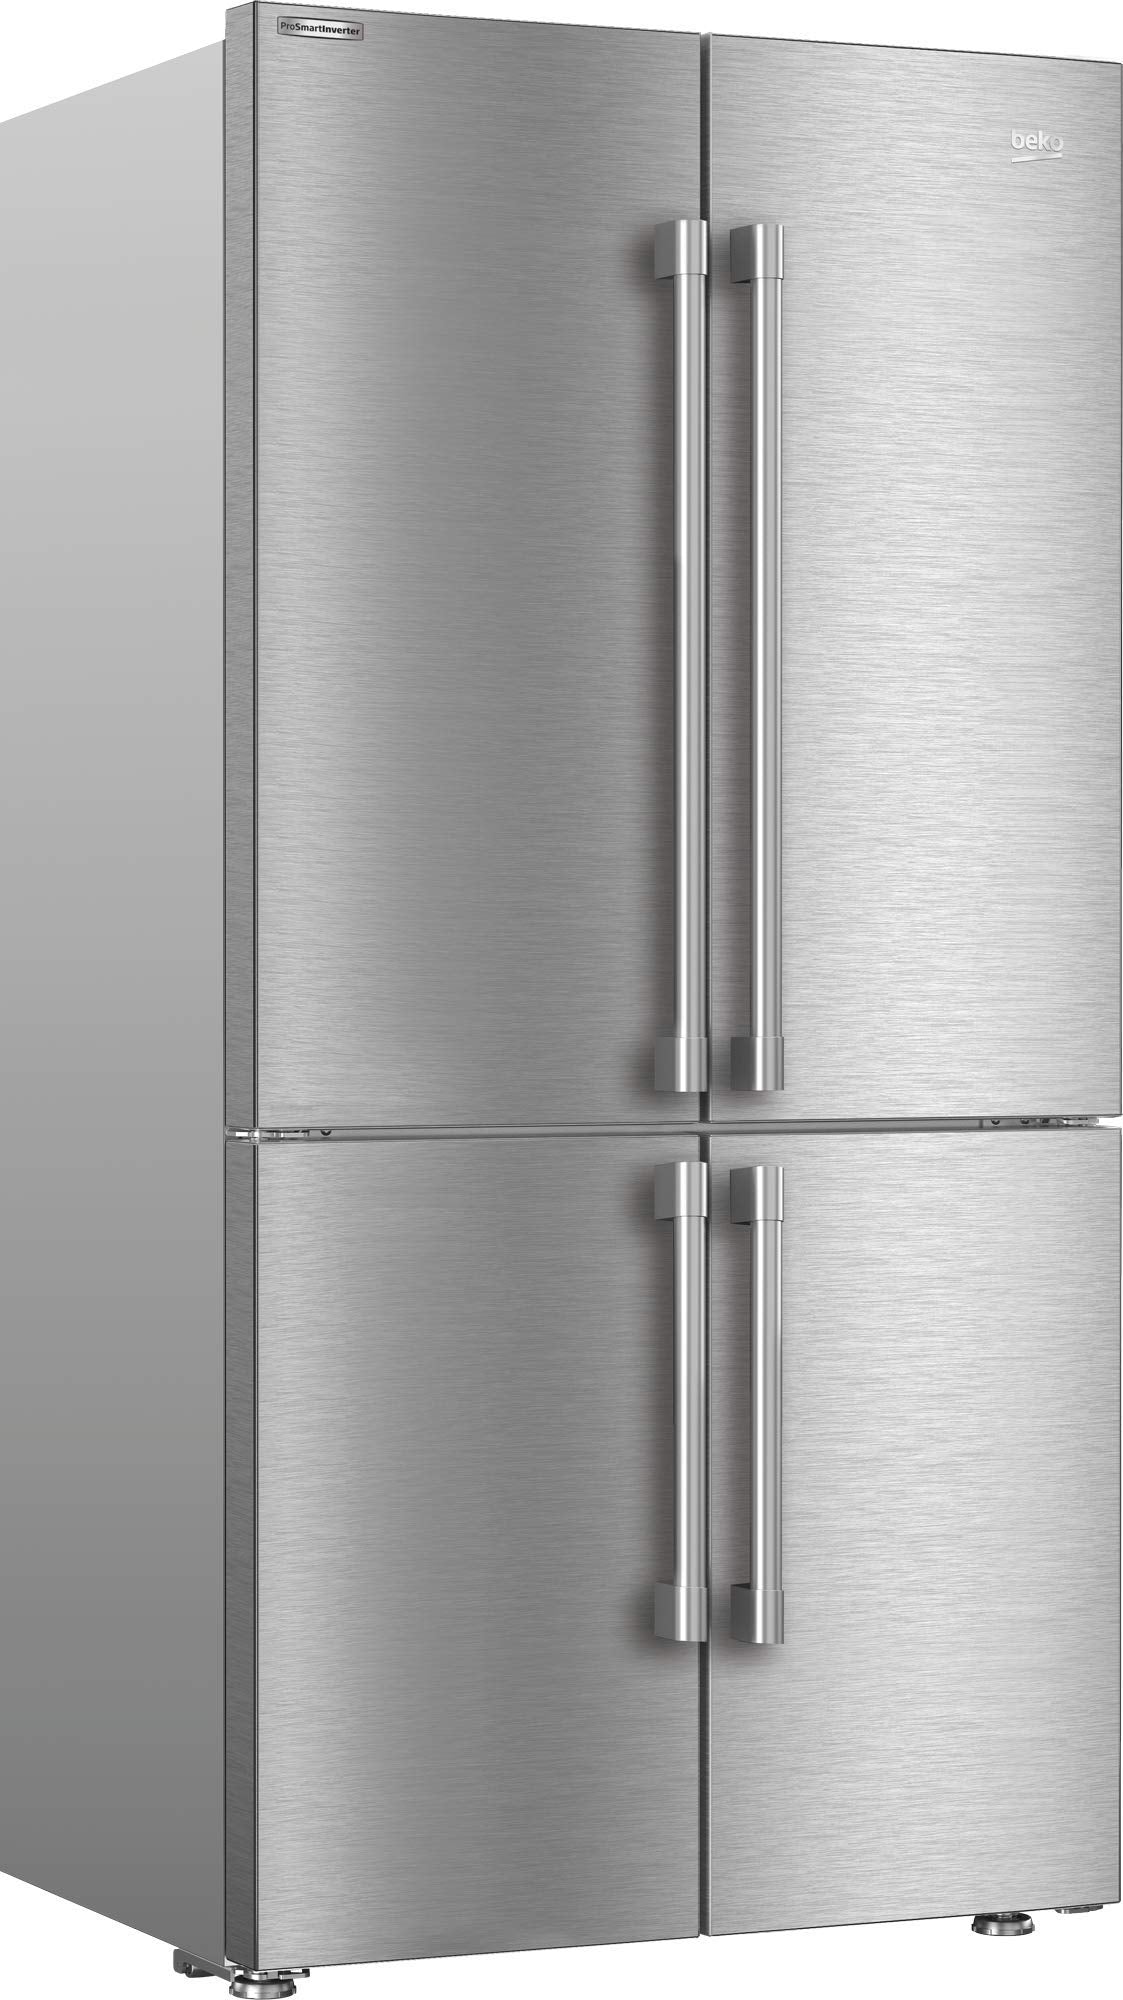 Beko BFFD3626SS 36 Inch Counter-Depth 4-Door French Door Refrigerator with MultiZone Compartment,Internal Water Dispenser, Sabbath Mode and ENERGY STAR Qualified